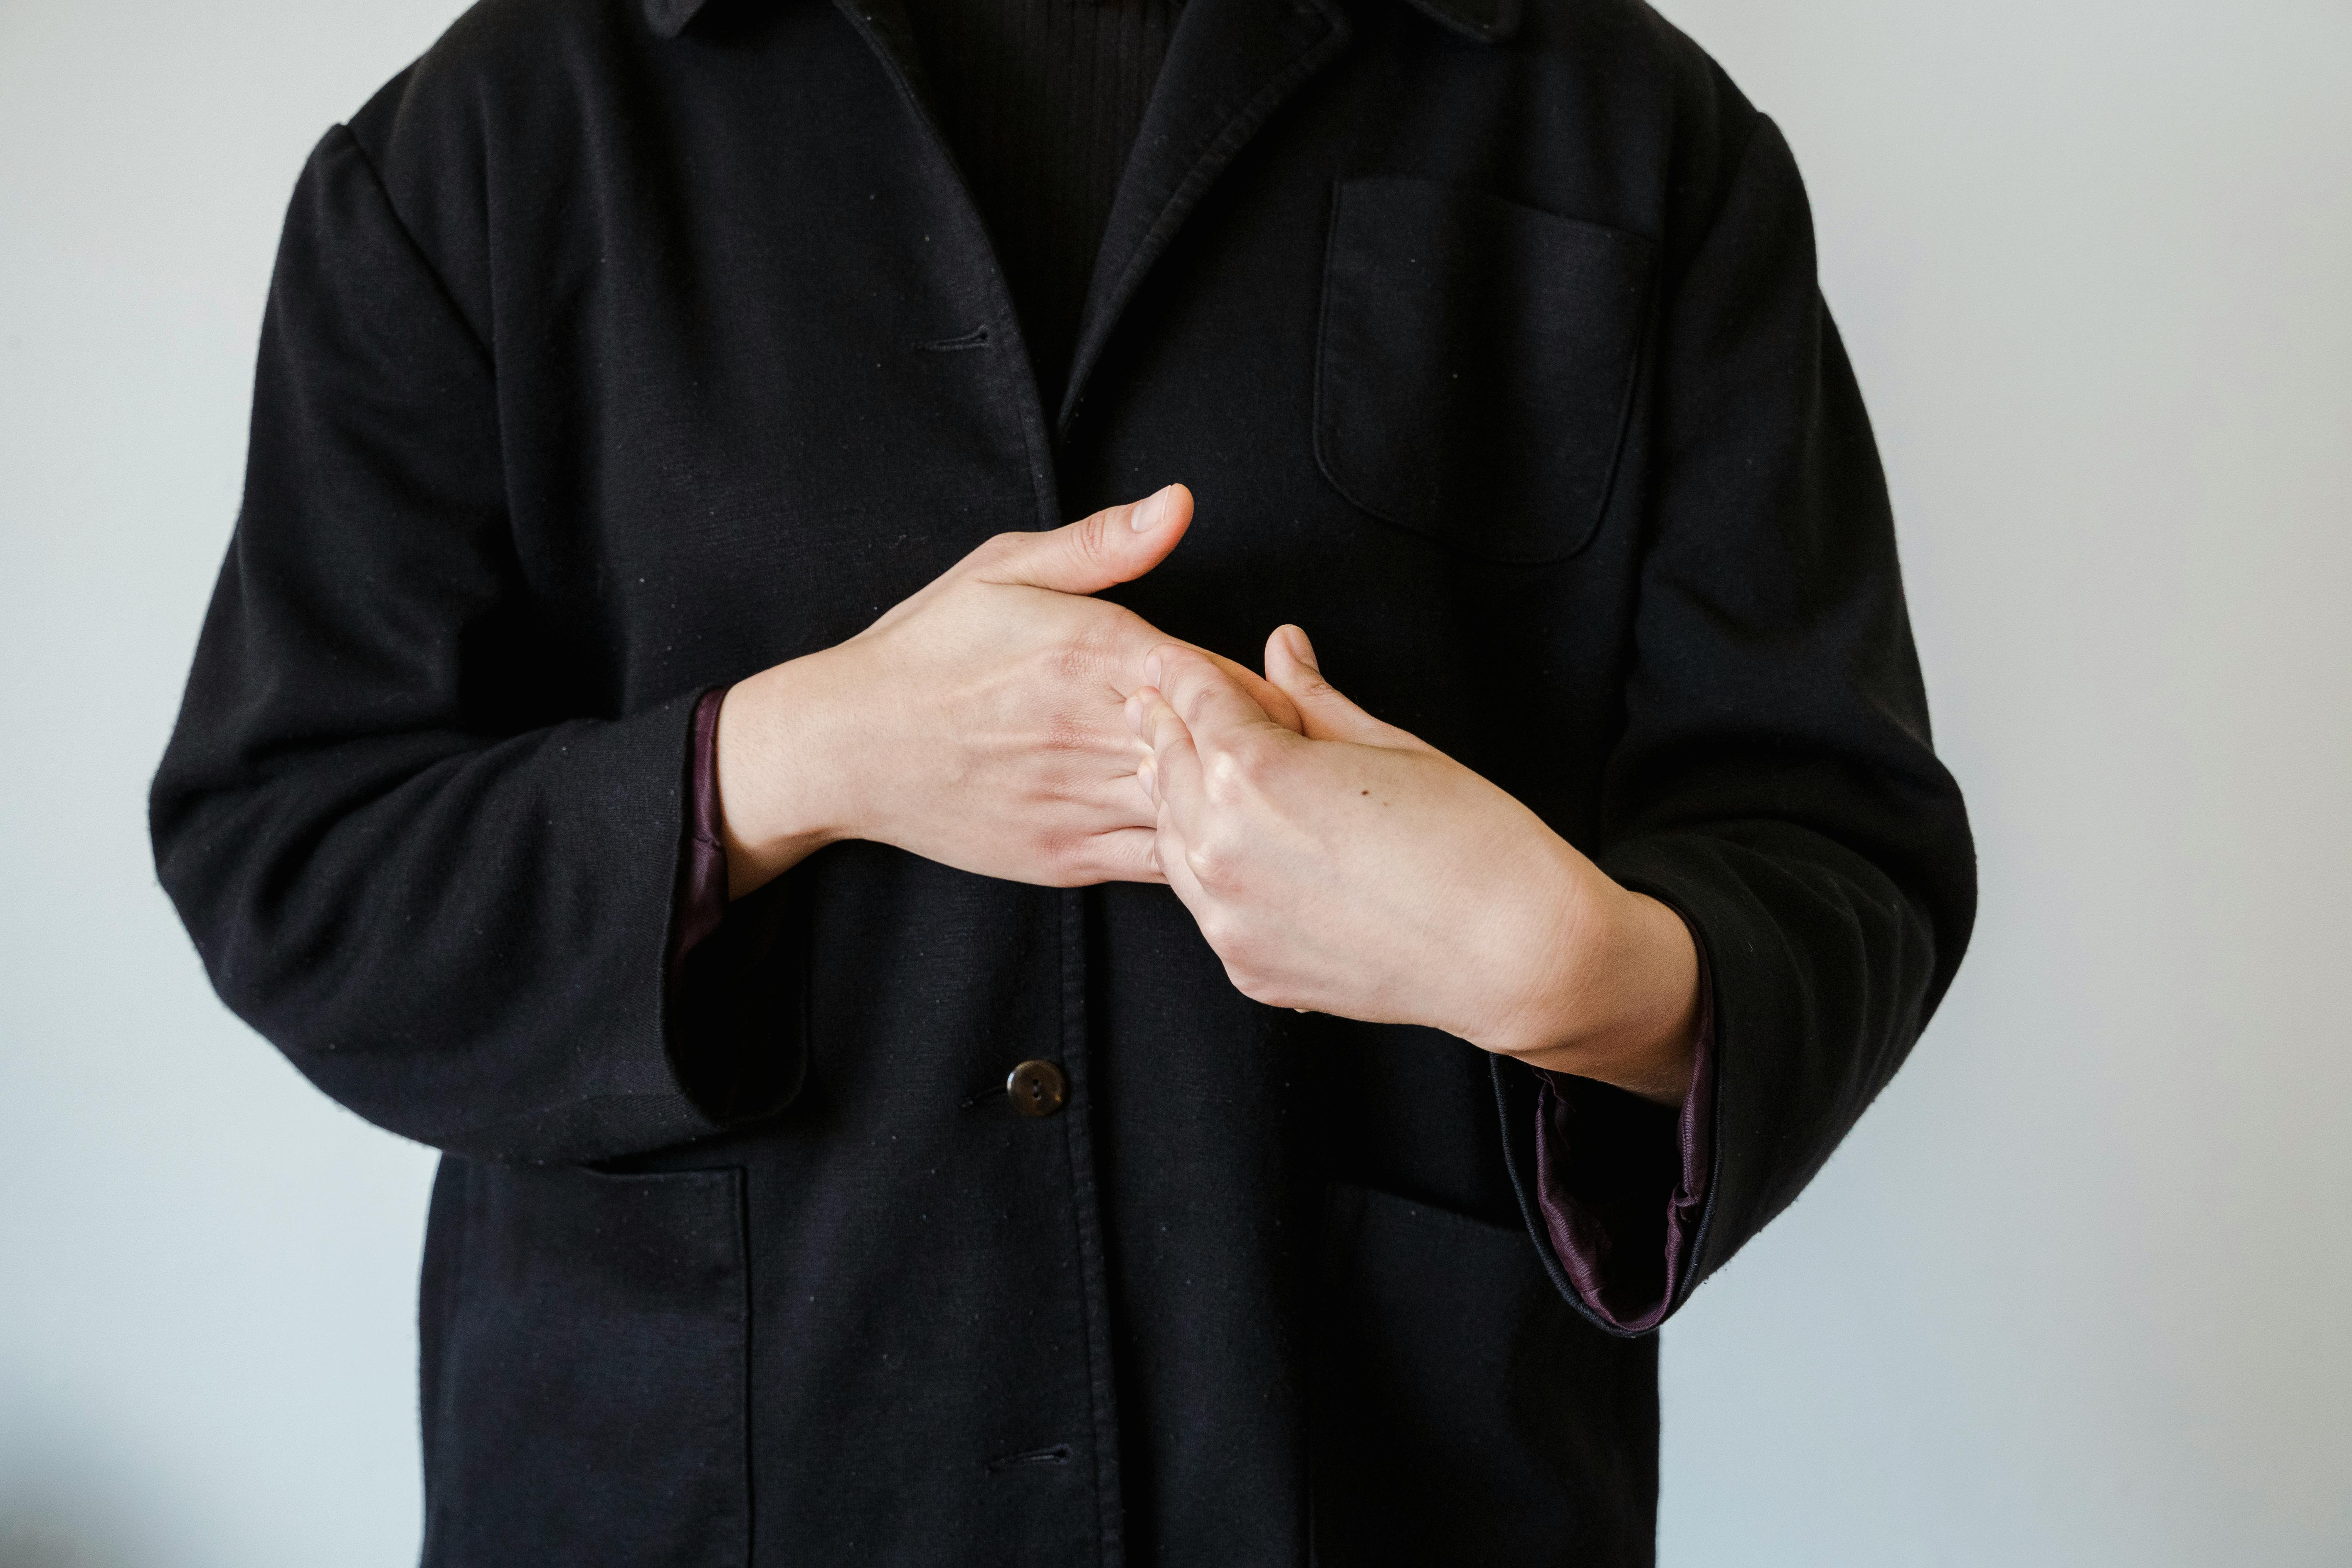 a person doing sign language